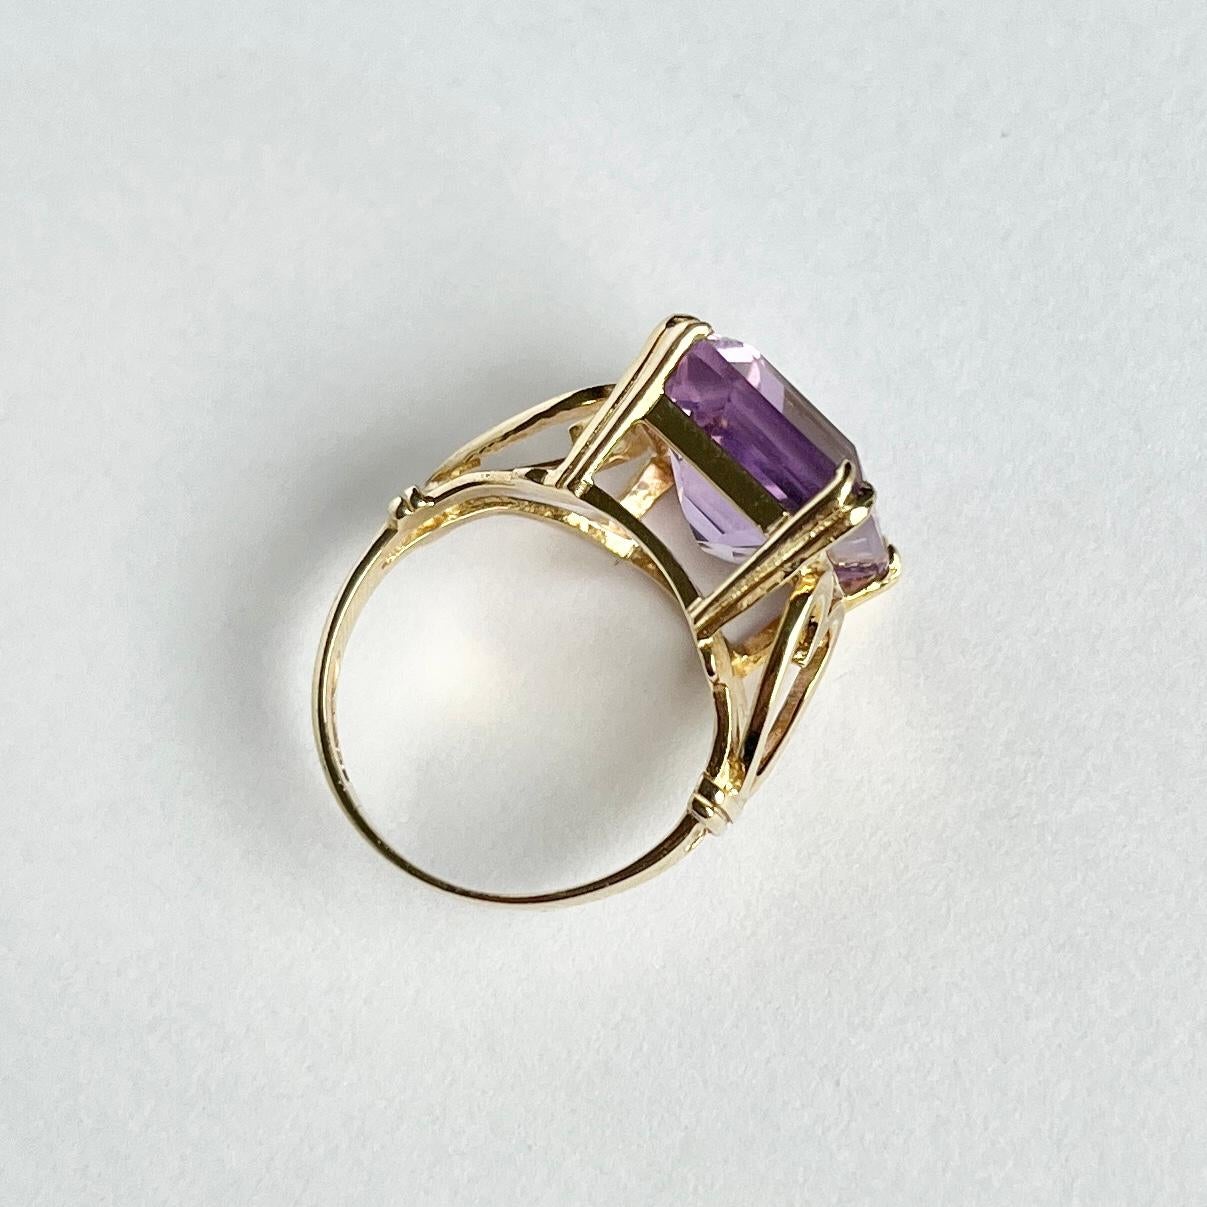 The amethyst set up high upon this ring is a gorgeous purple stone held in simple claws with heart shoulders. Modelled in 9carat gold and has an open work gallery. Hallmarked Birmingham 1978.

Ring Size: G 1/2 or 3 1/2 
Stone Dimensions: 12x10mm